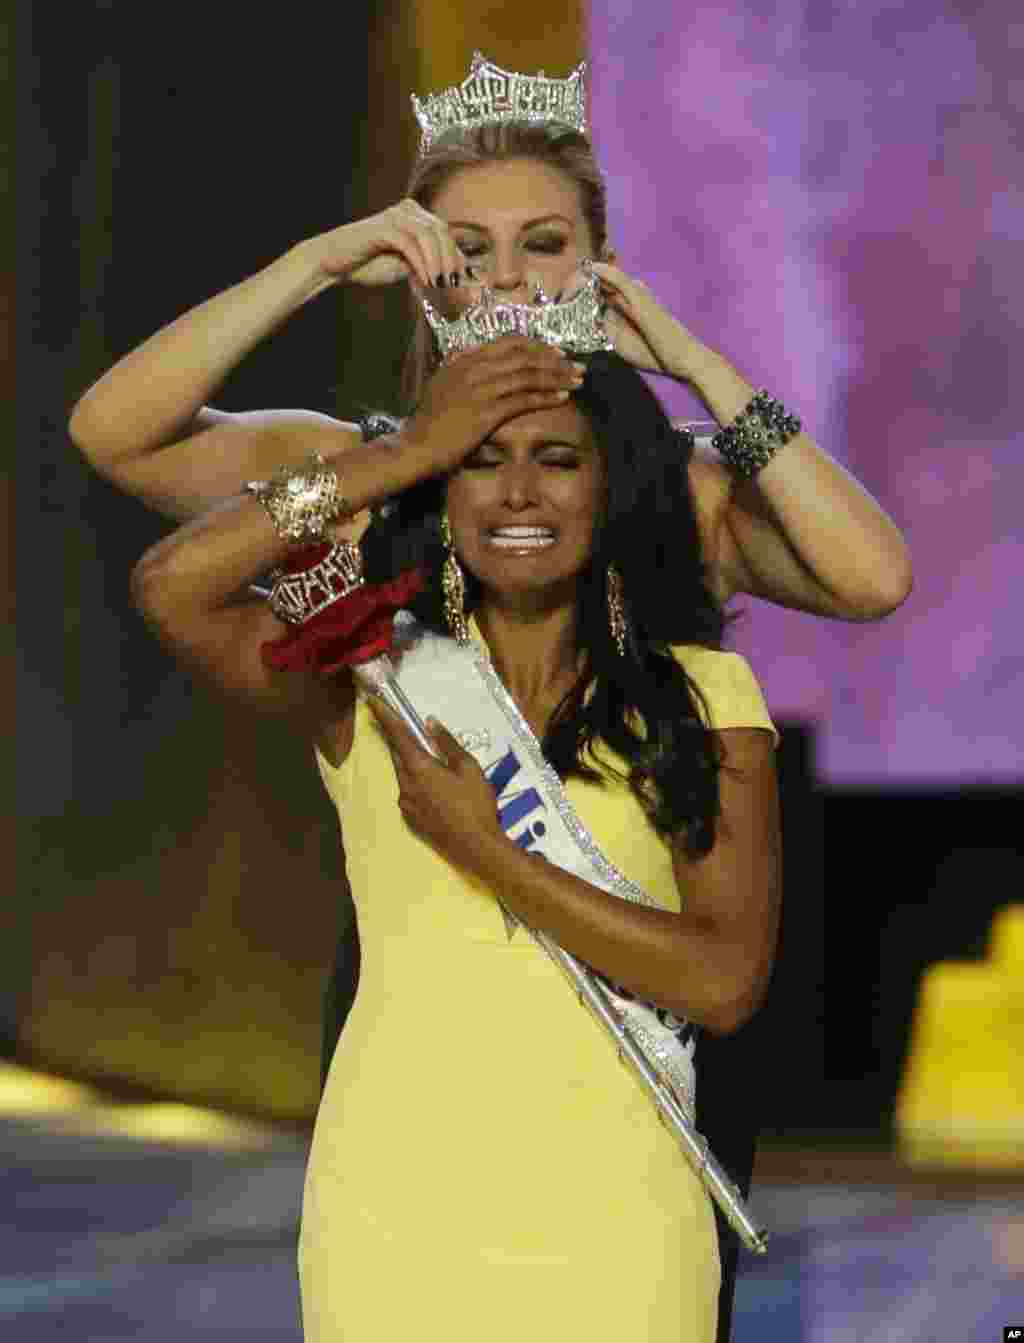 Miss New York Nina Davuluri, 24, is crowned as Miss America 2014 by Miss America 2013 Mallory Hagan in Atlantic City, New Jersey, Sept. 15, 2013.